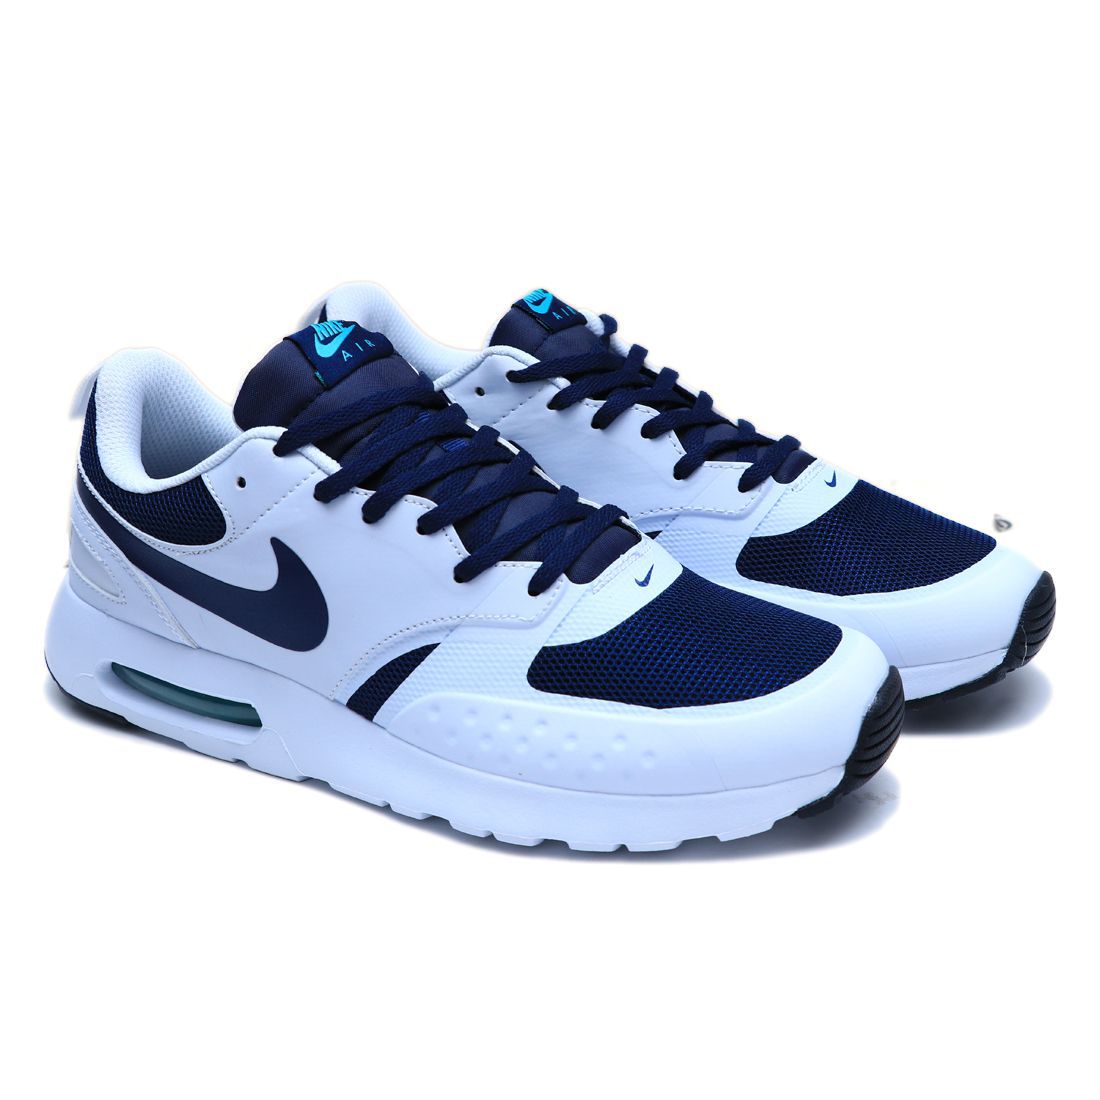 Nike Air Max Vision White Running Shoes - Buy Nike Air Max Vision White ...